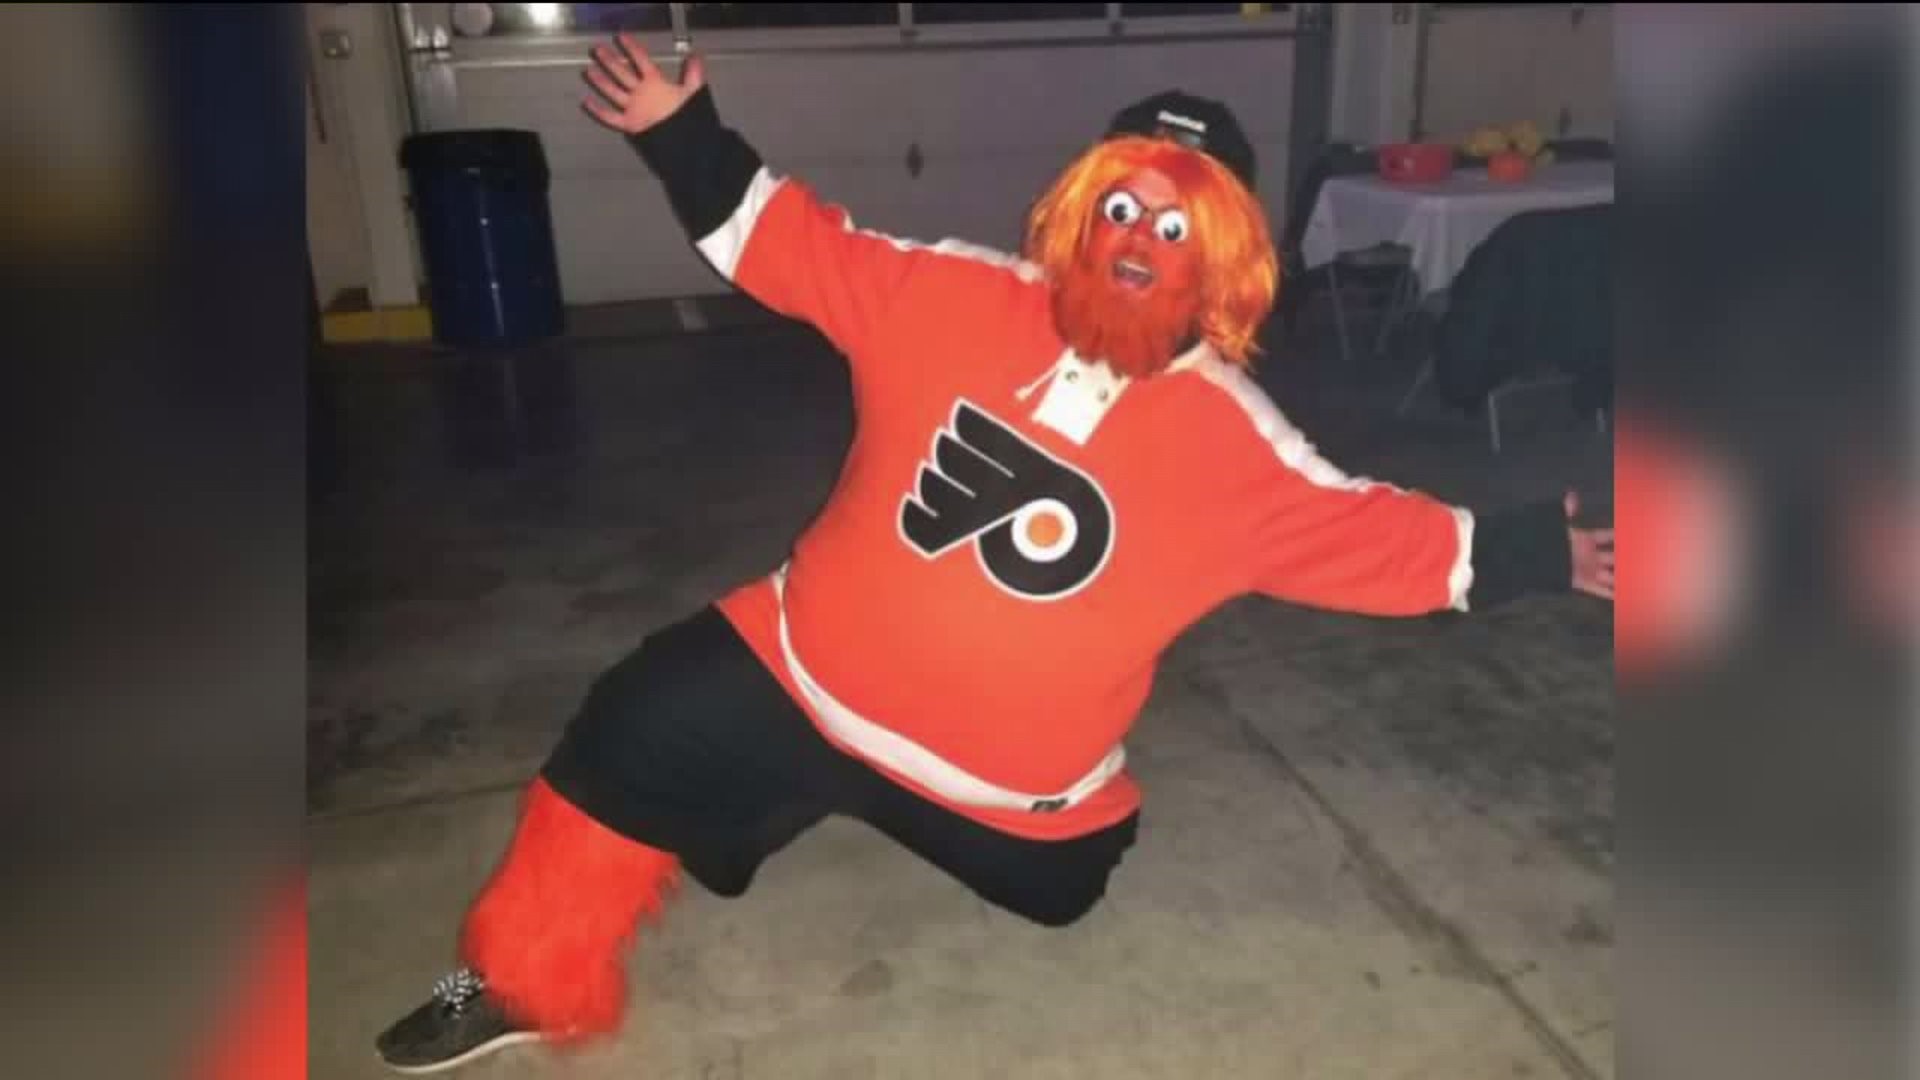 'Gritty' Costume of Carbon County Man Goes Viral